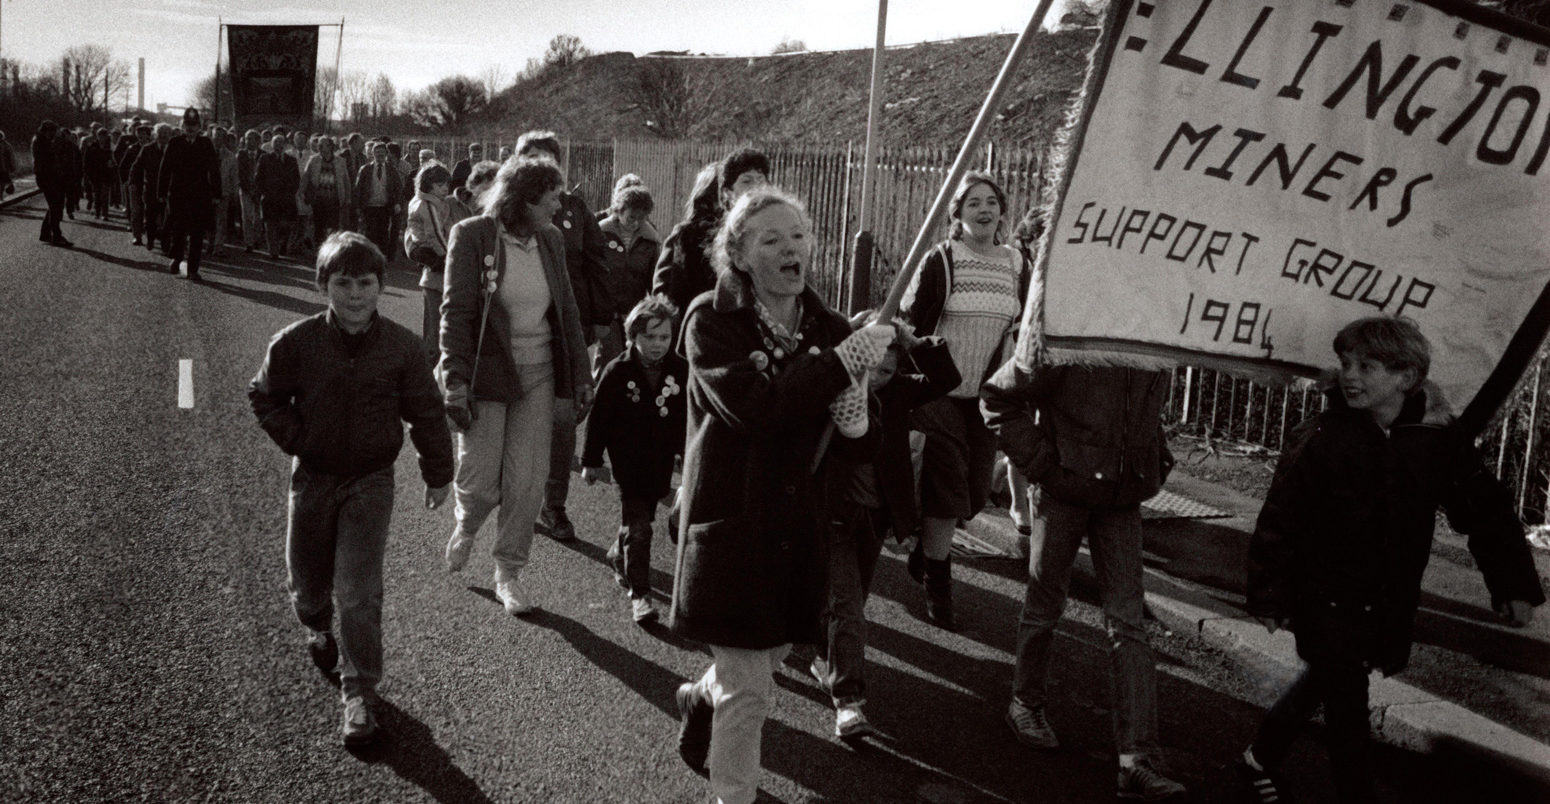 March back to work on 5 March at the end of miners strike in Ellington Colliery, England, 1985_2BN28RJ